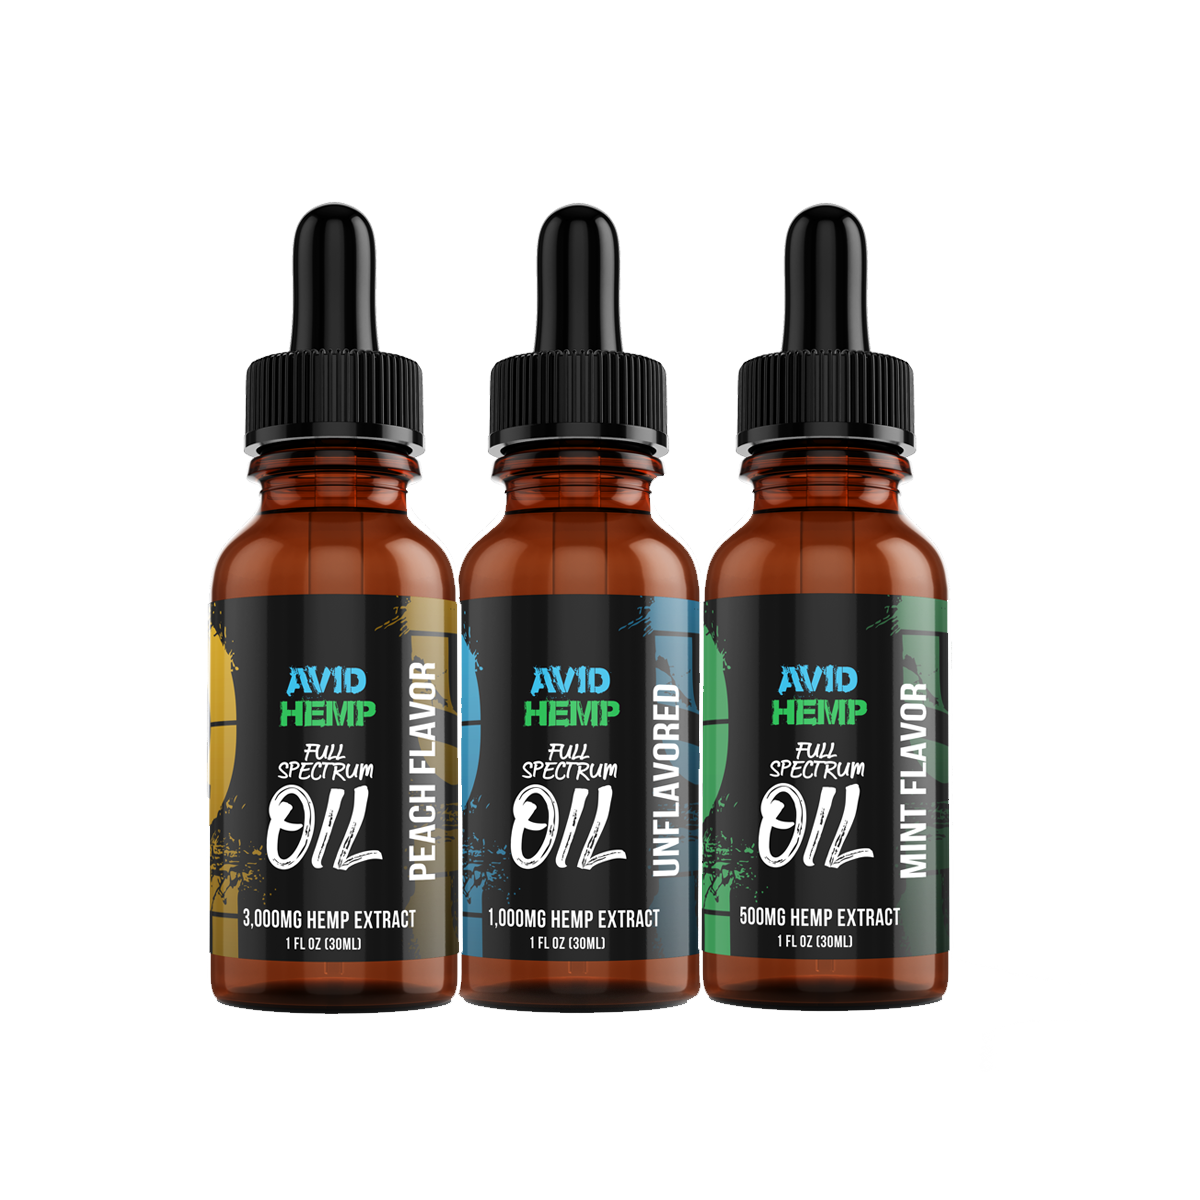 CBD OIL By Swdistro-Comprehensive Review Exploring the Best CBD Oil Products